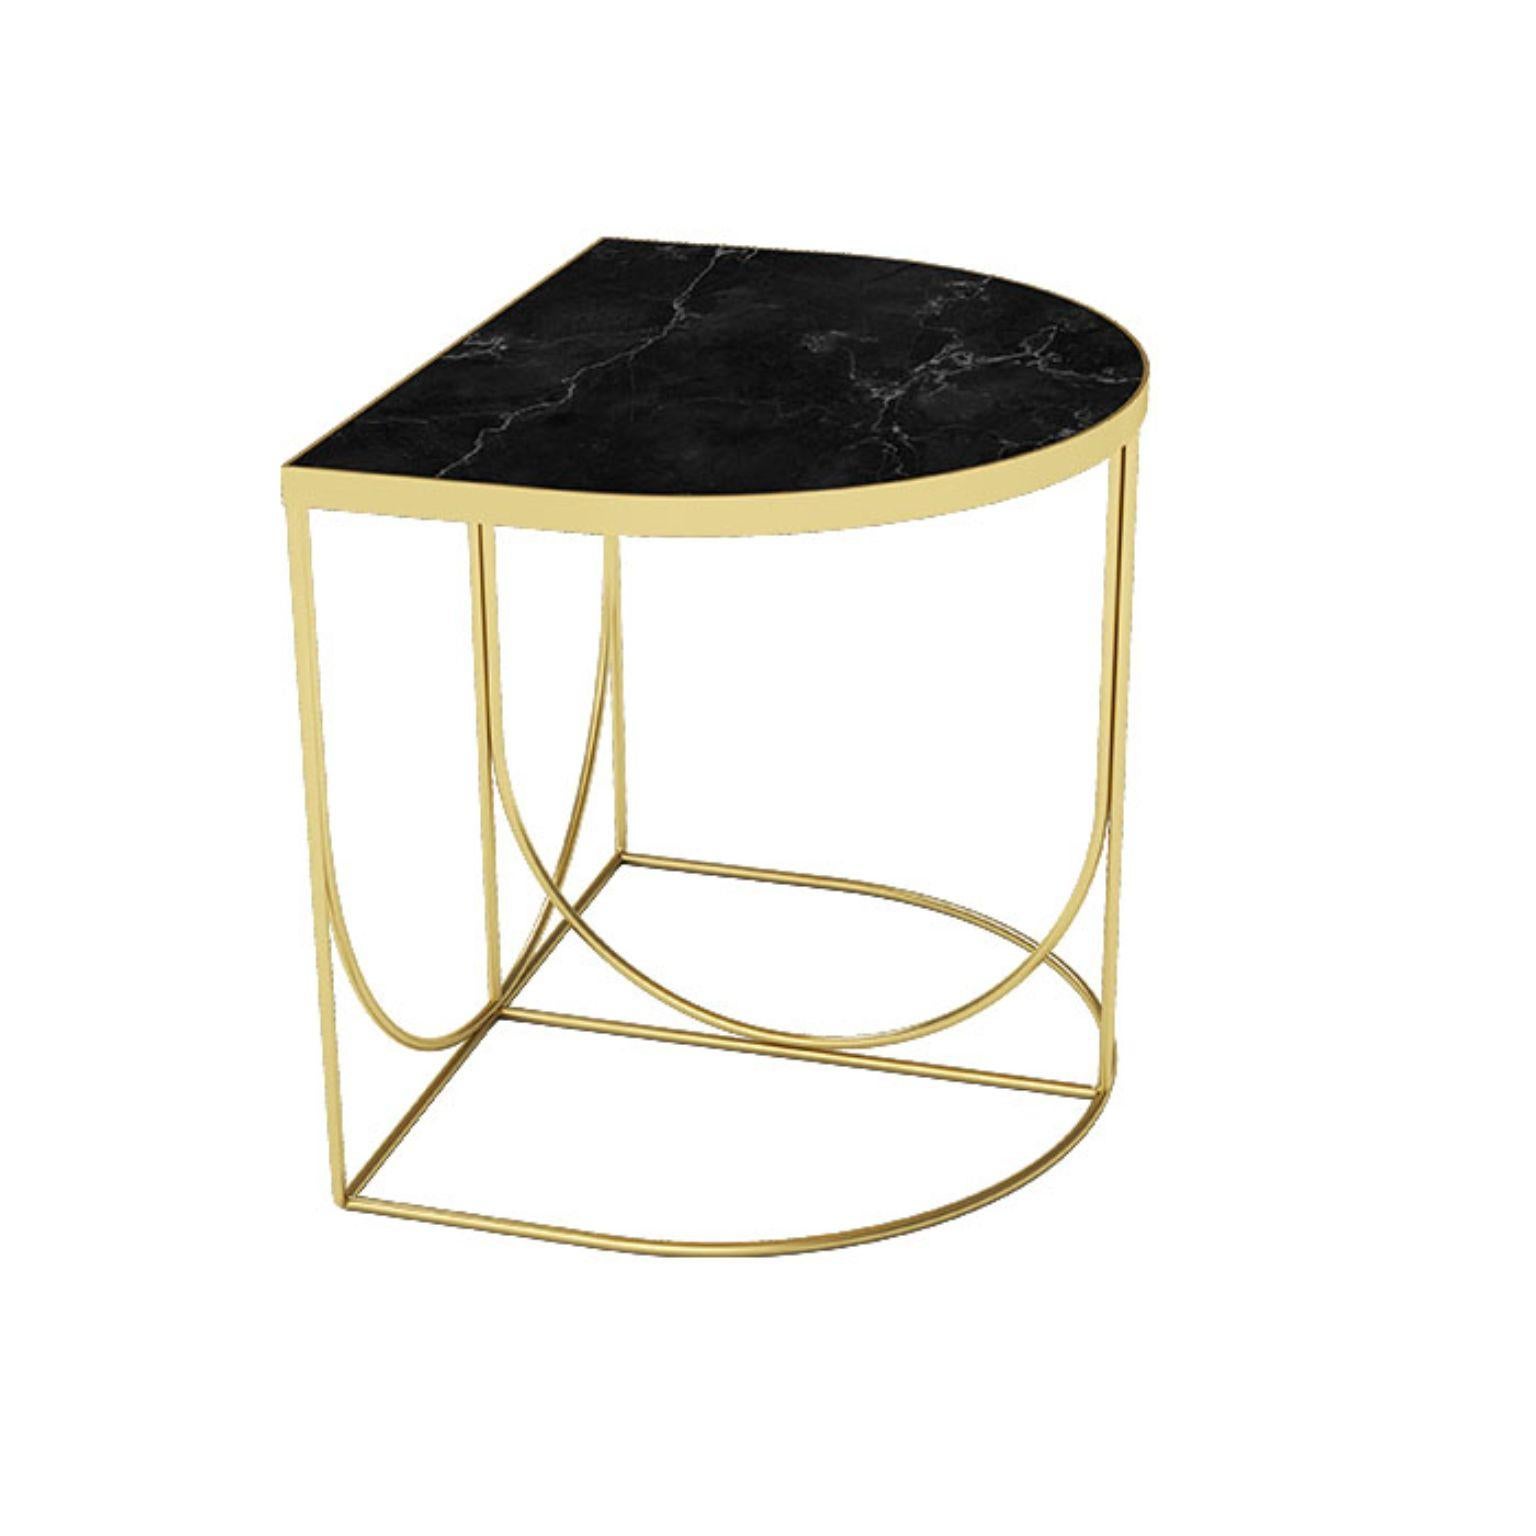 Black marble and gold steel minimalist side table
Dimensions: L 40 x W 50 x H 44,3 CM
Materials: Marble, steel 

This series consists of three different designs that you can combine in many different ways. The table tops come in two different